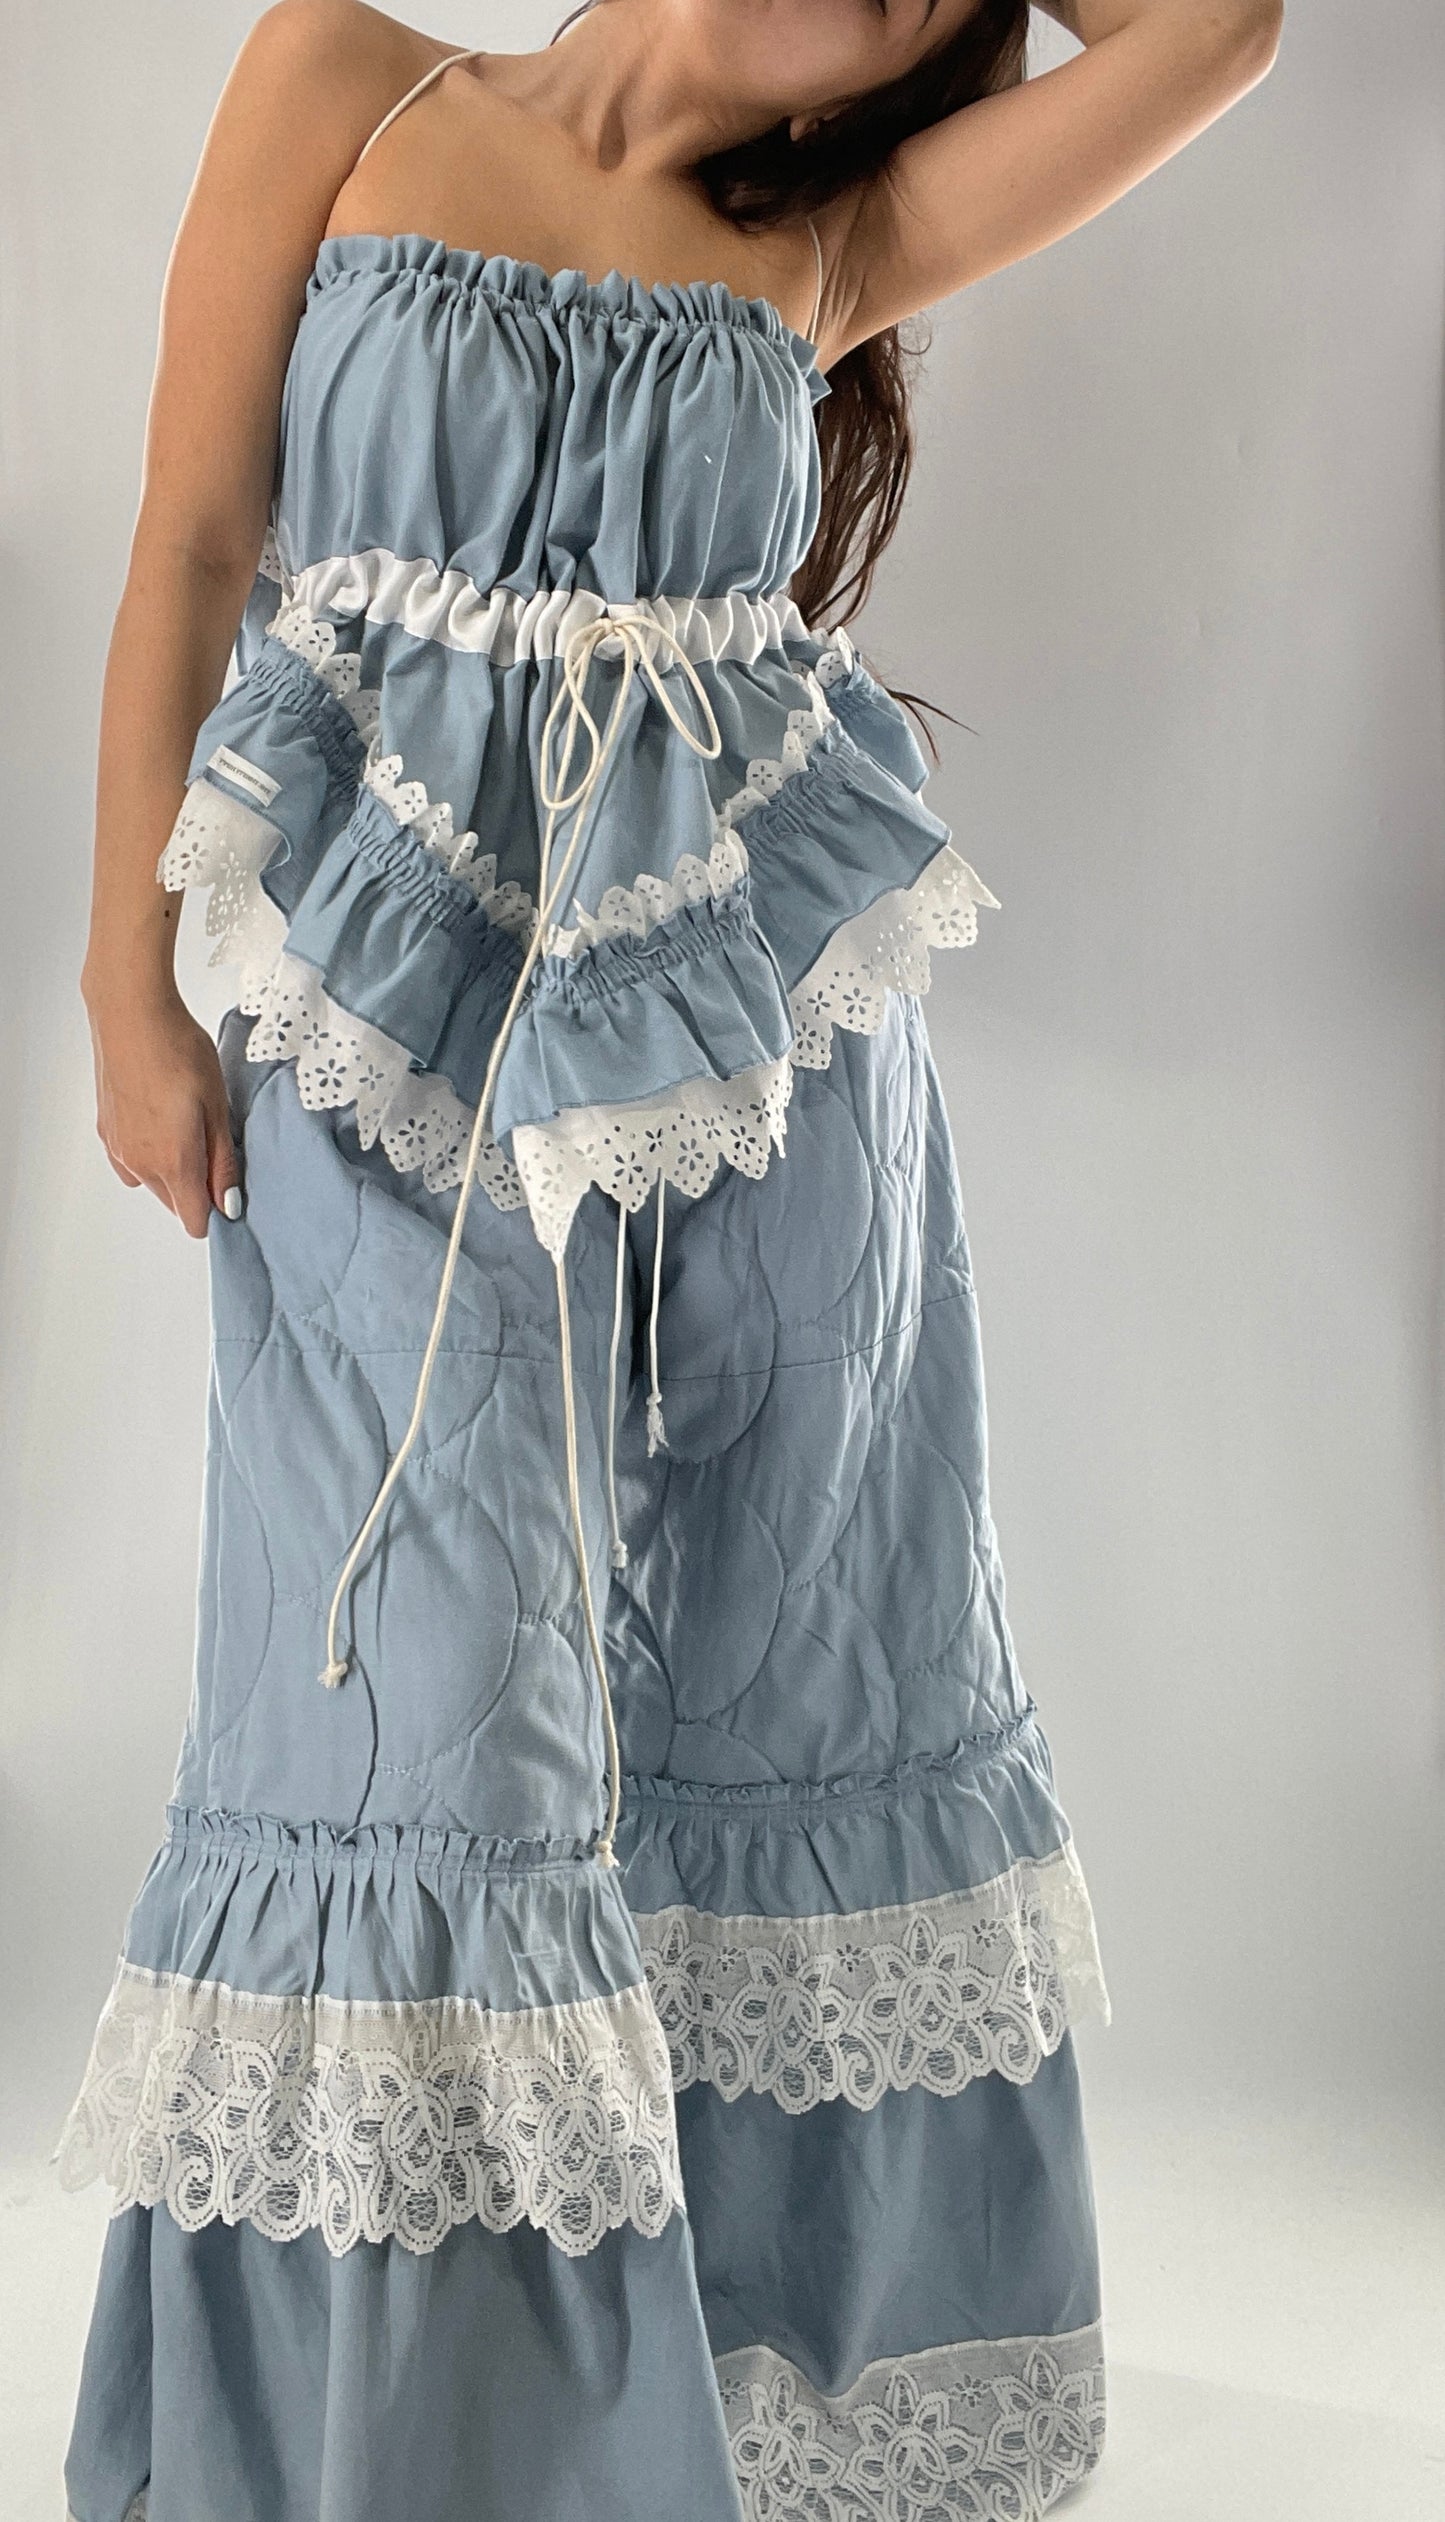 Vintage 2 Piece Powder Blue Set Featuring 2Way Blouse and Quilted Trousers Covered in Ruffles, Lace and Trim (One Size)